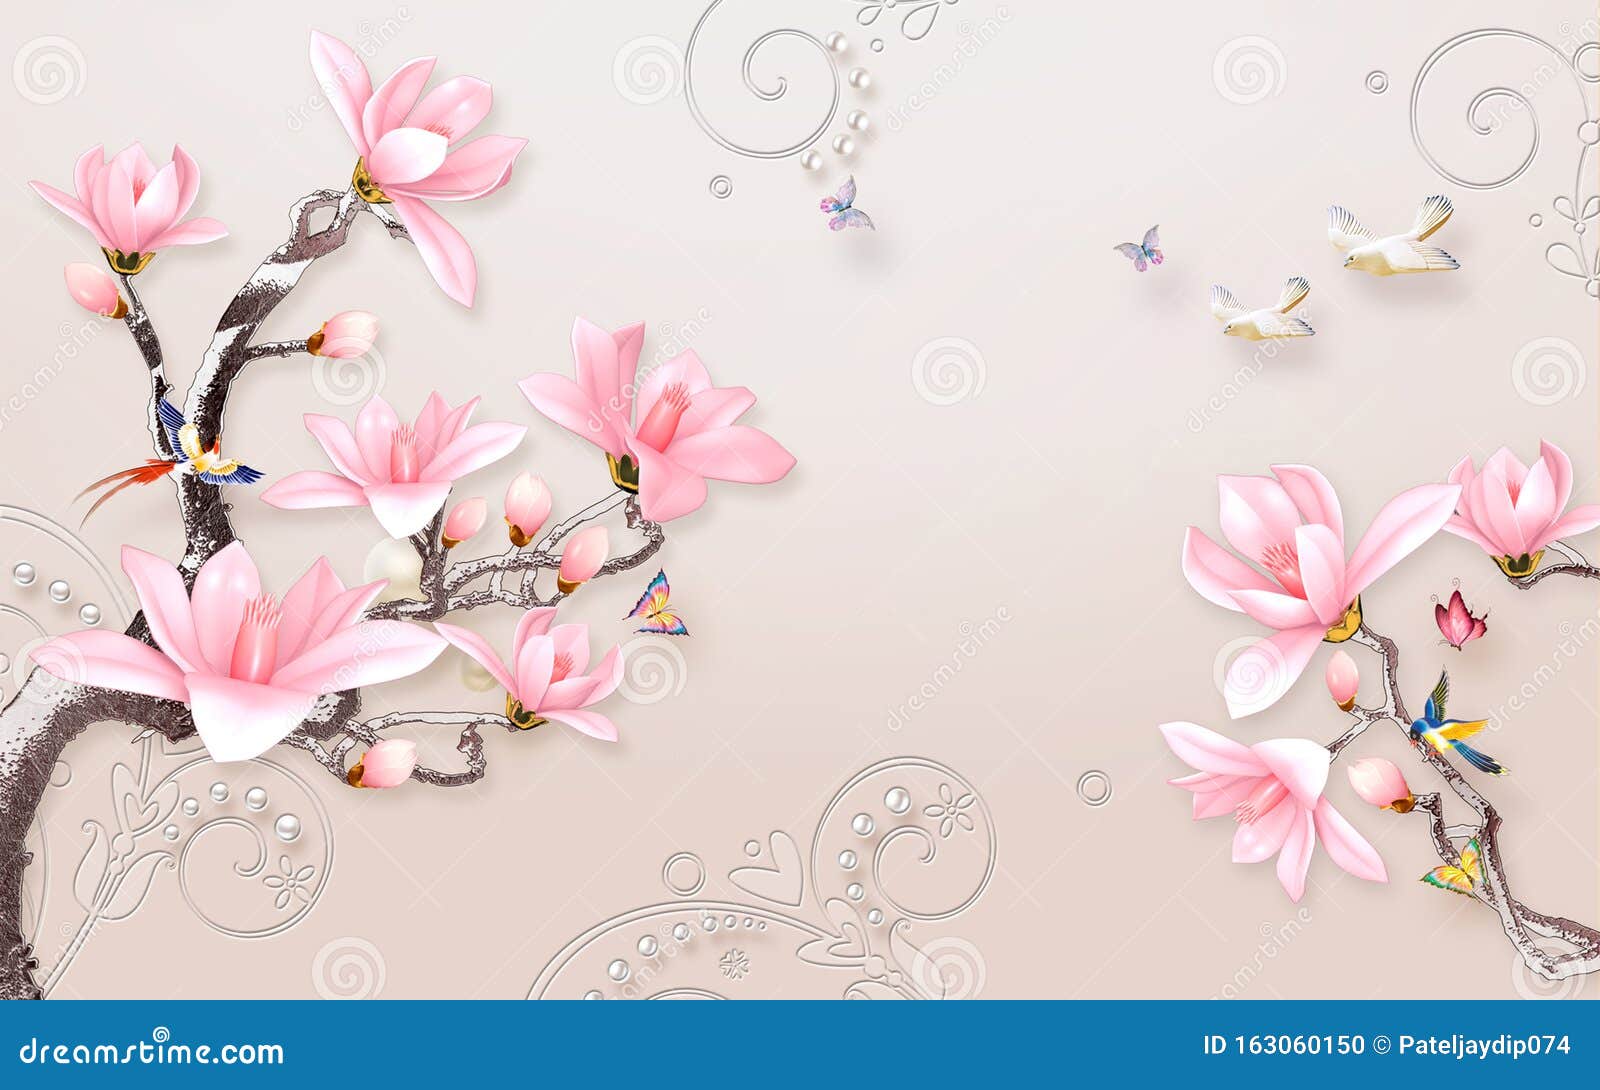 3d wallpaper,background,decoration,,wall